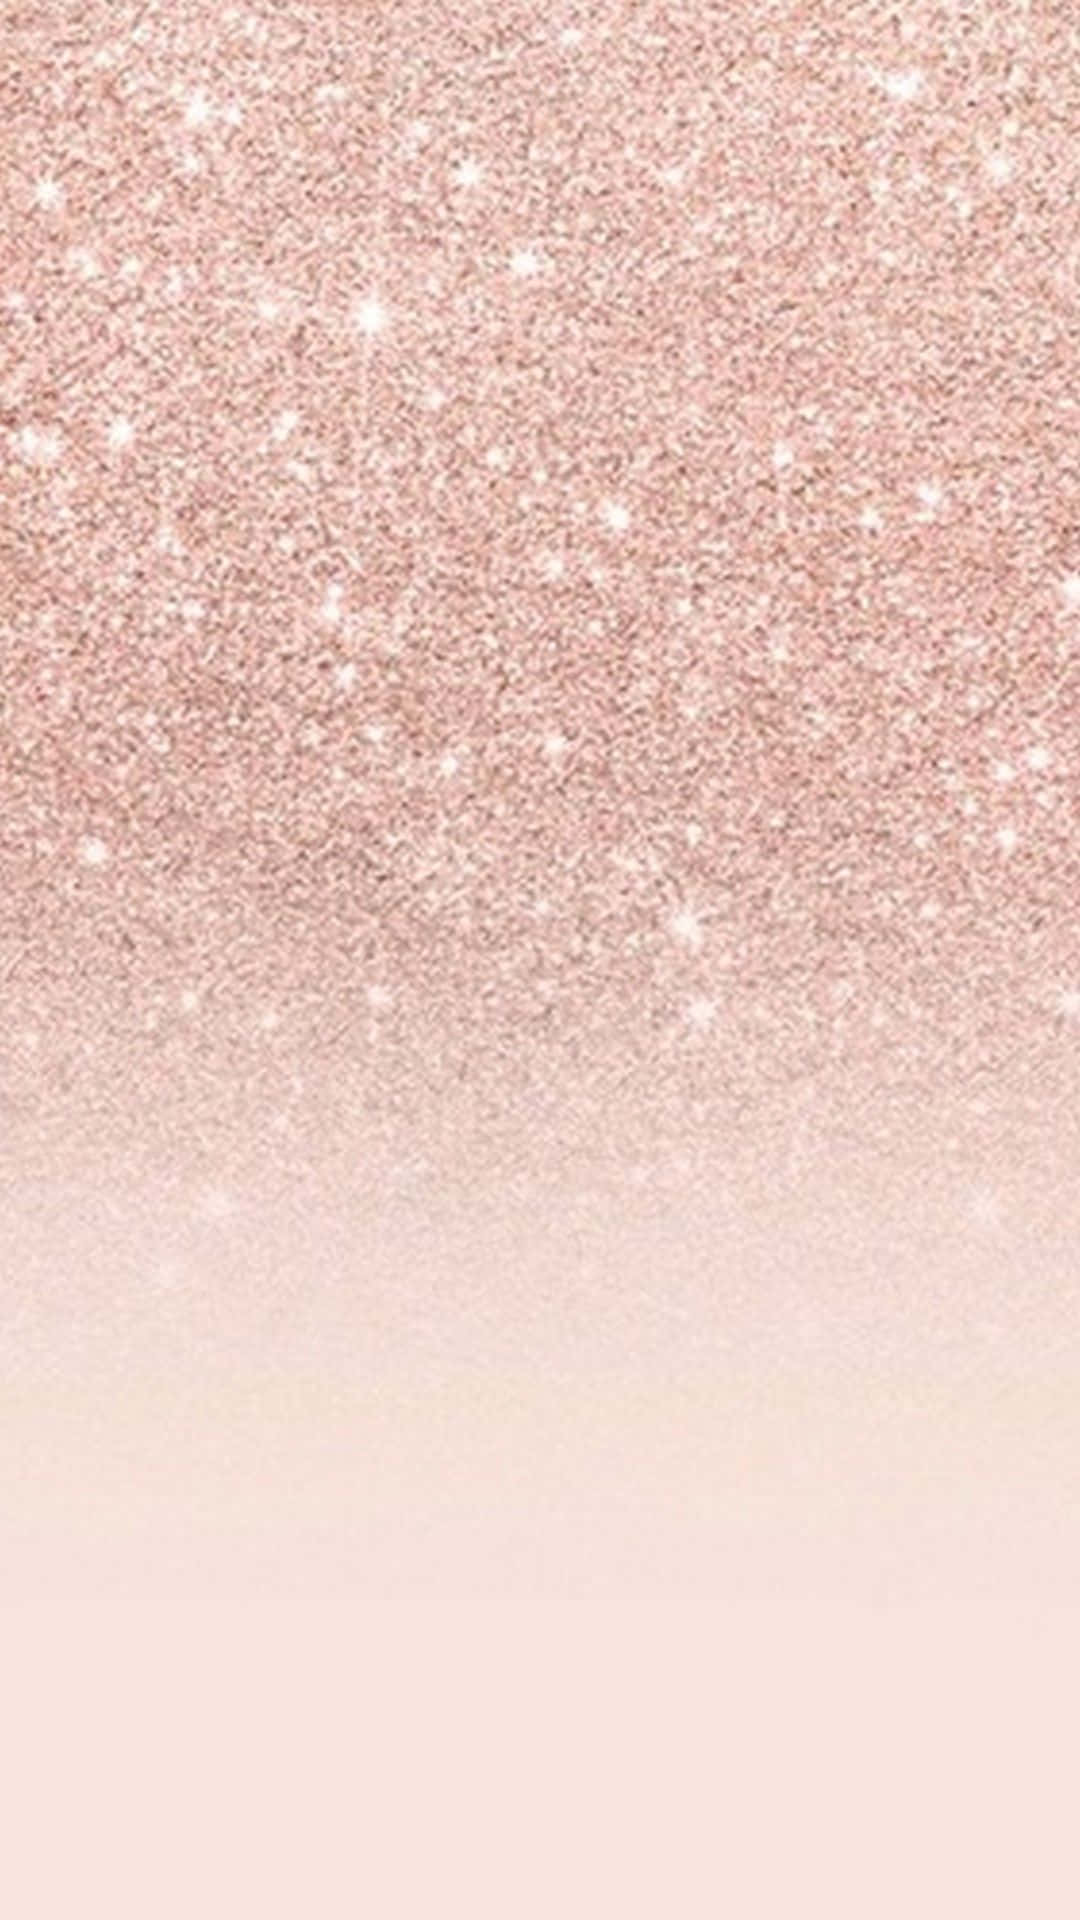 Rose gold aesthetic background creates a luxurious and glamorous look